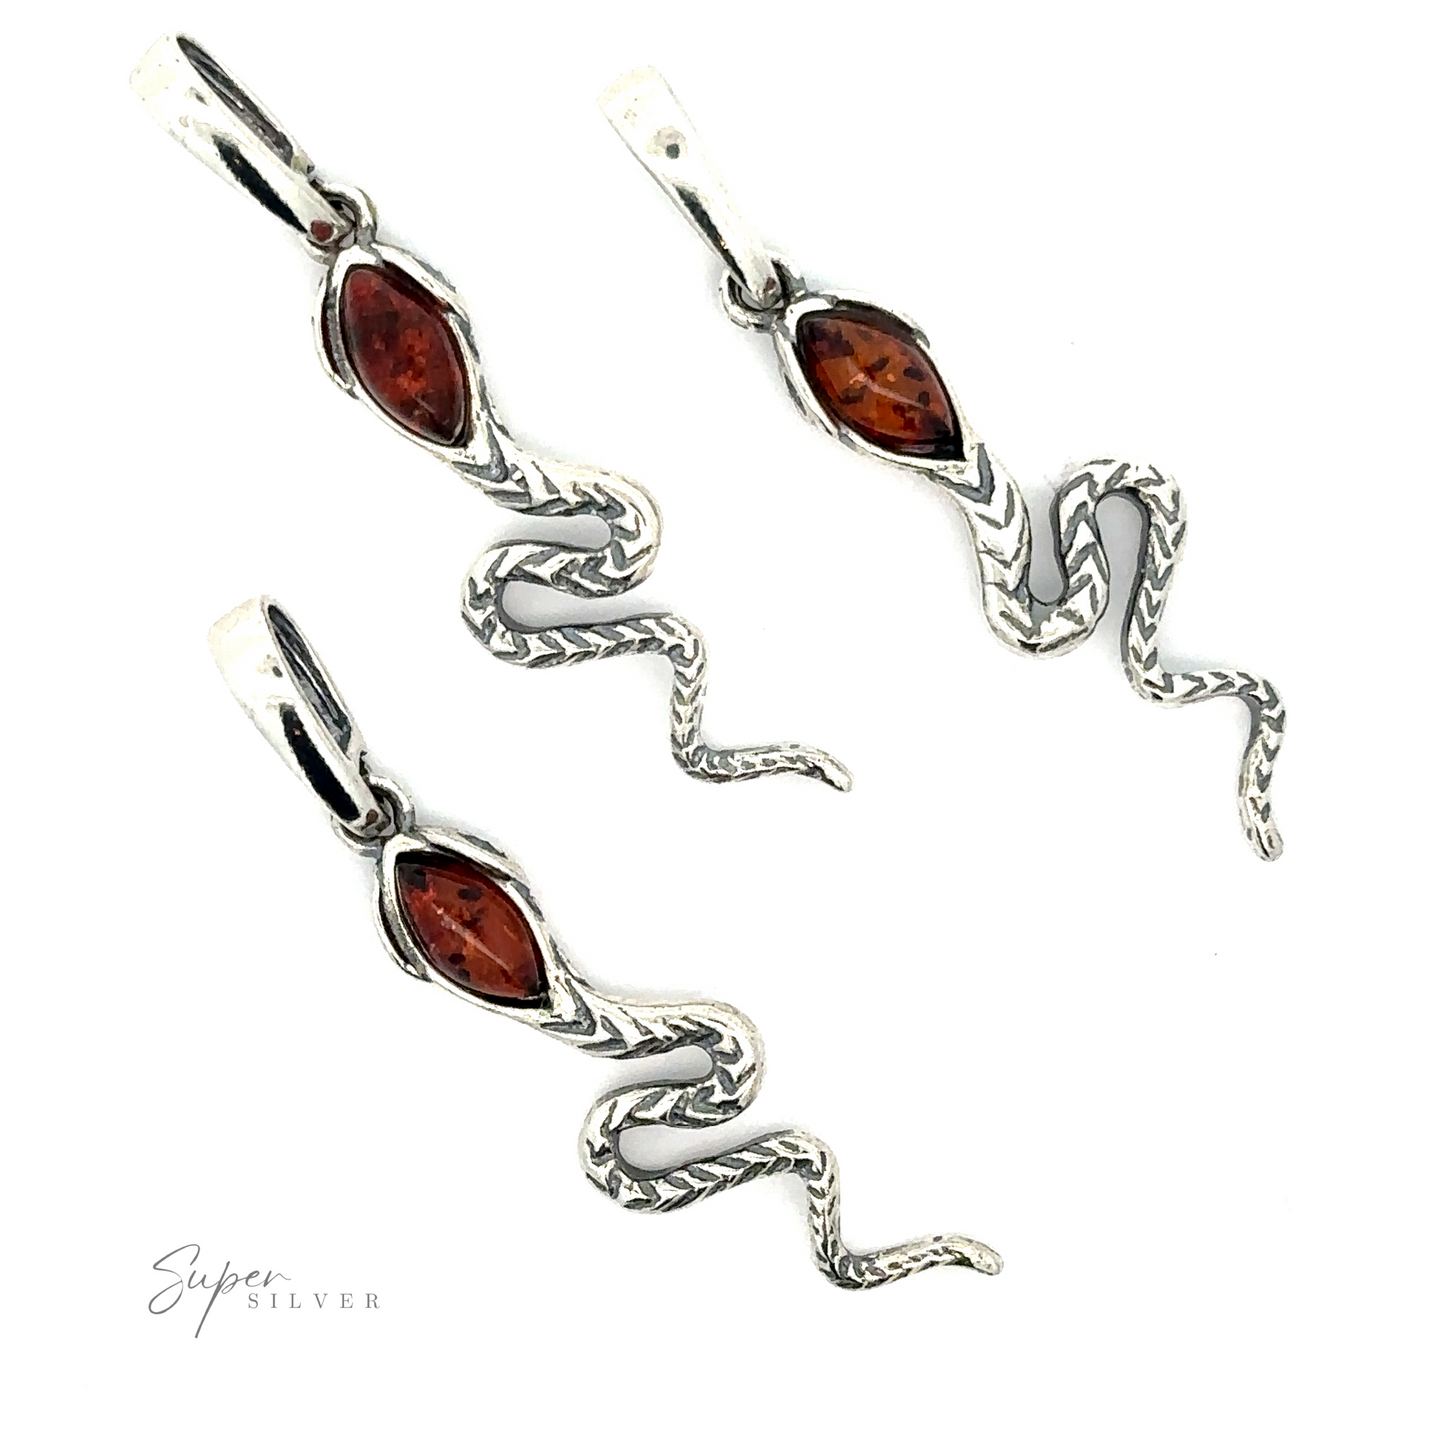 
                  
                    A pair of silver snake-shaped earrings with Baltic amber stones embedded in their heads, set against a white background. The earrings boast intricate detailing along the snake's bodies, giving them a vintage vibe that's timeless and elegant.

Alluring Amber Snake Pendant
                  
                